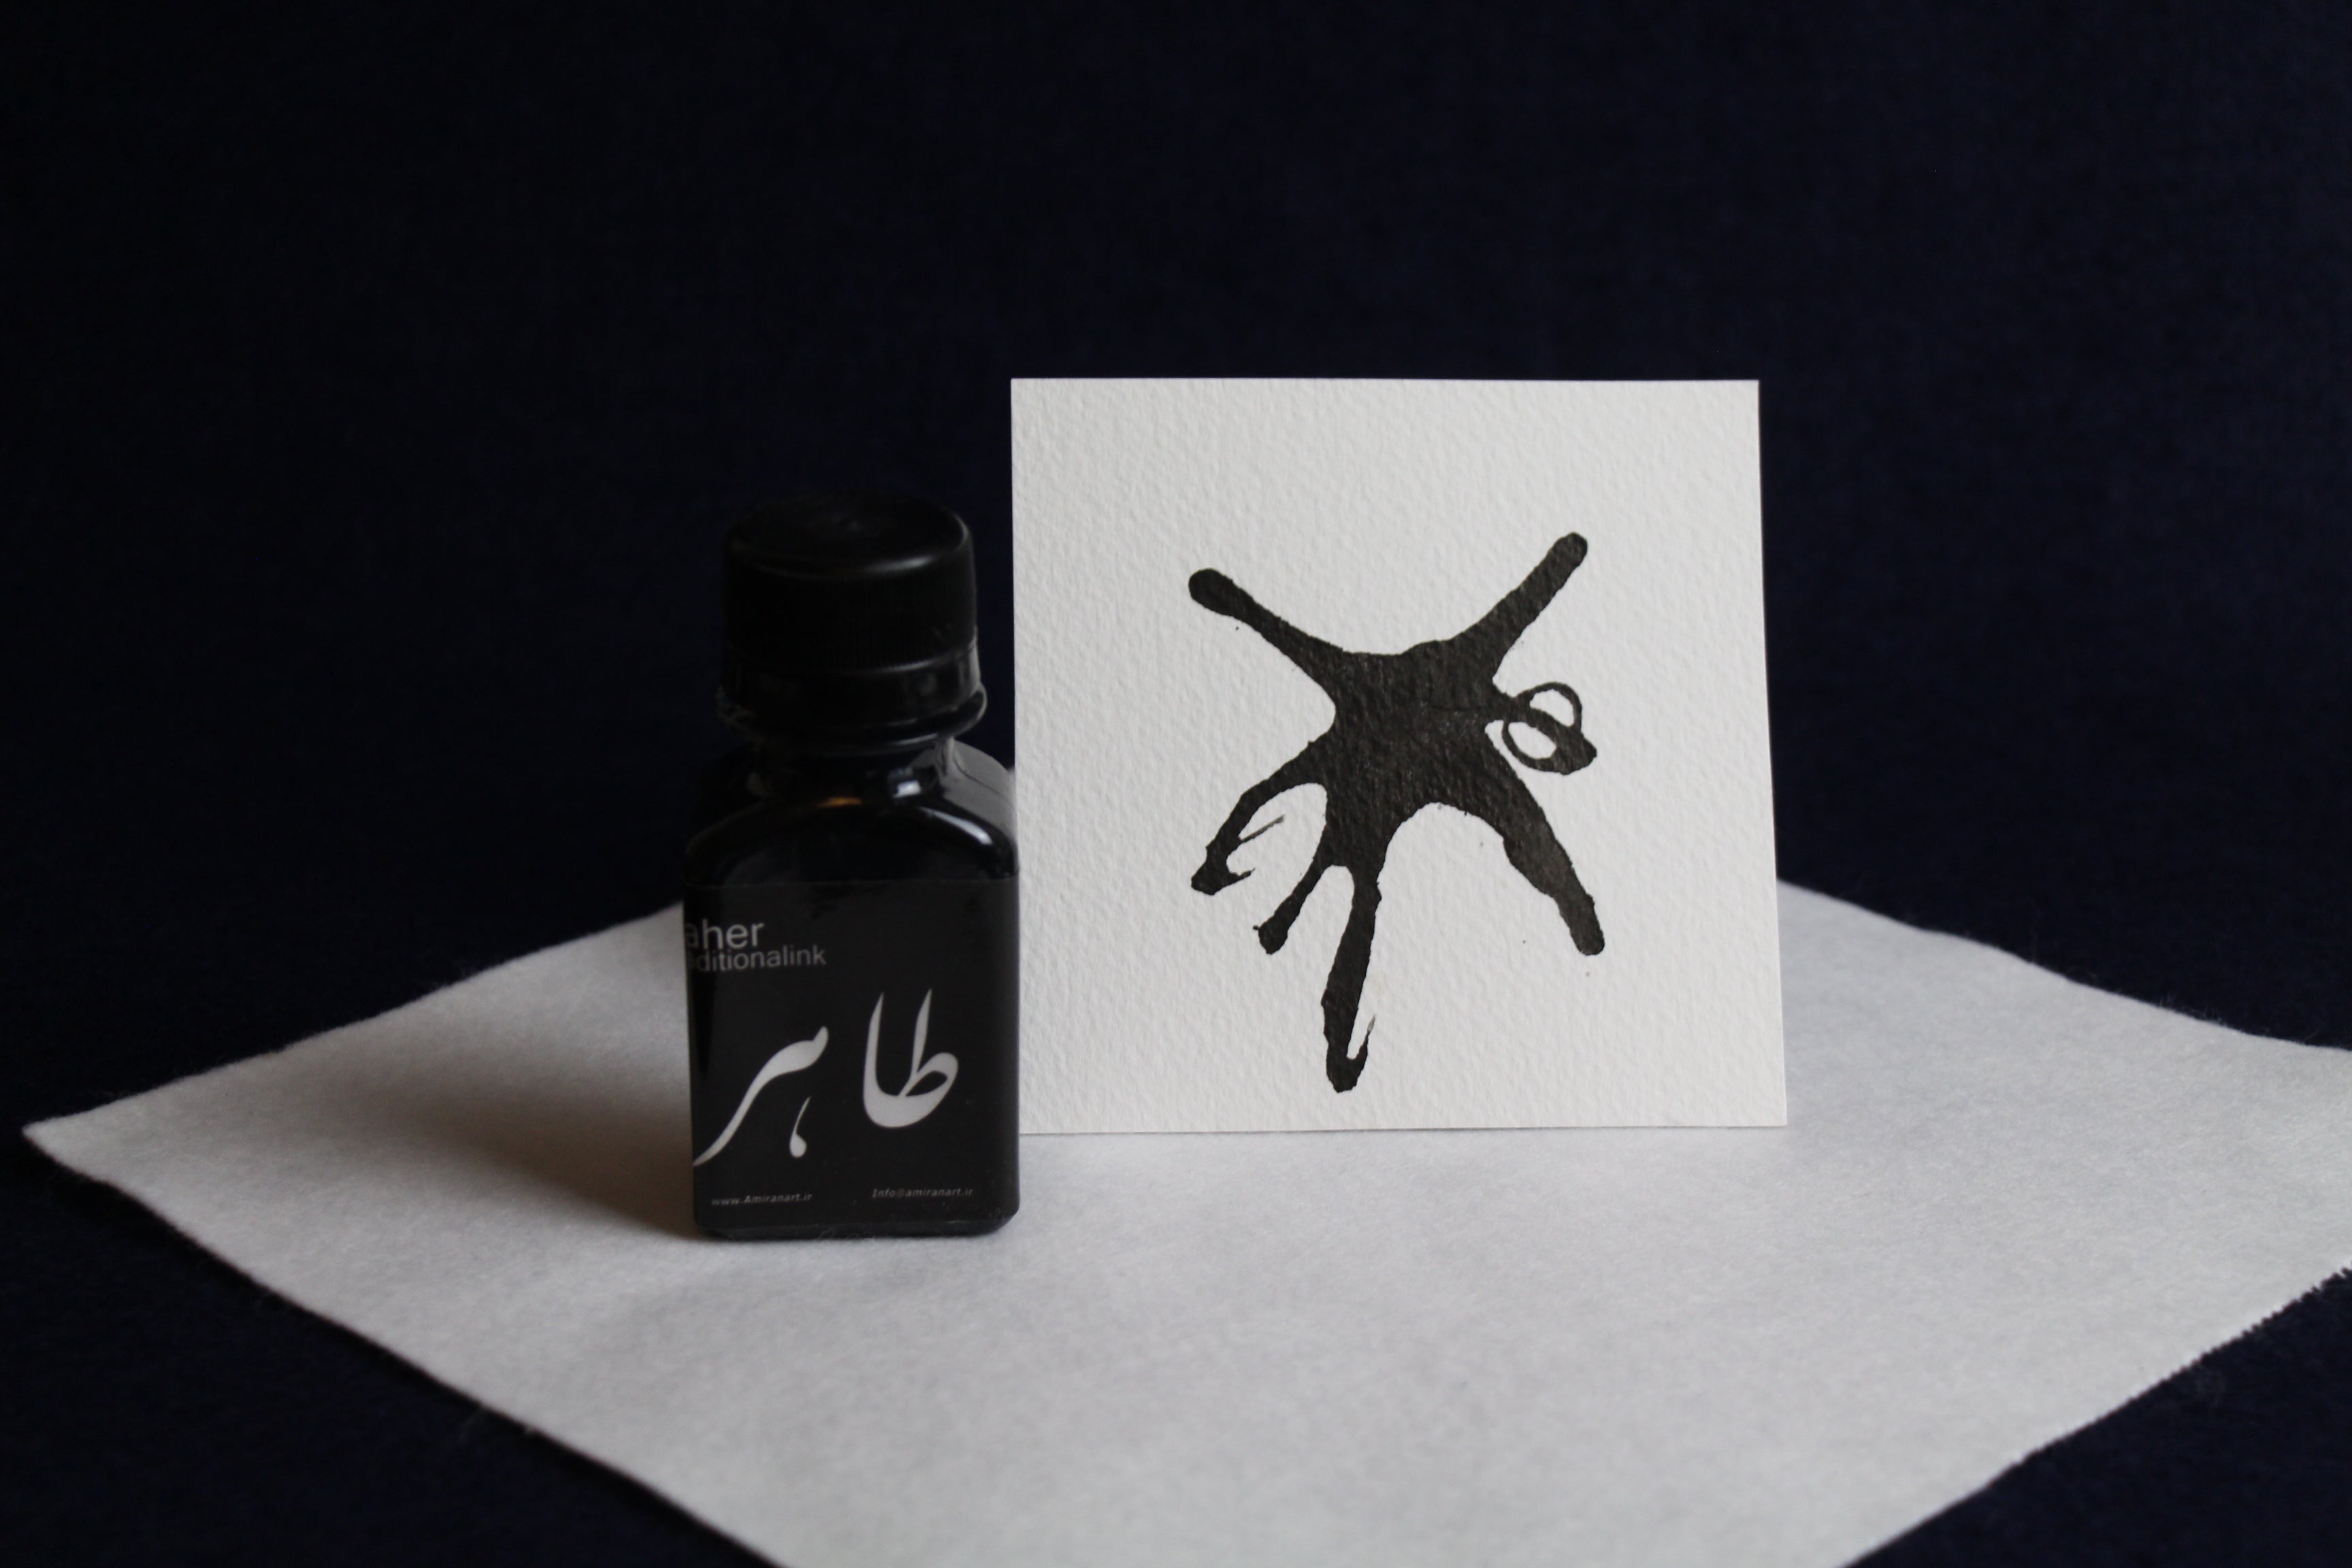 Taher traditional ink for Arabic calligraphy - black